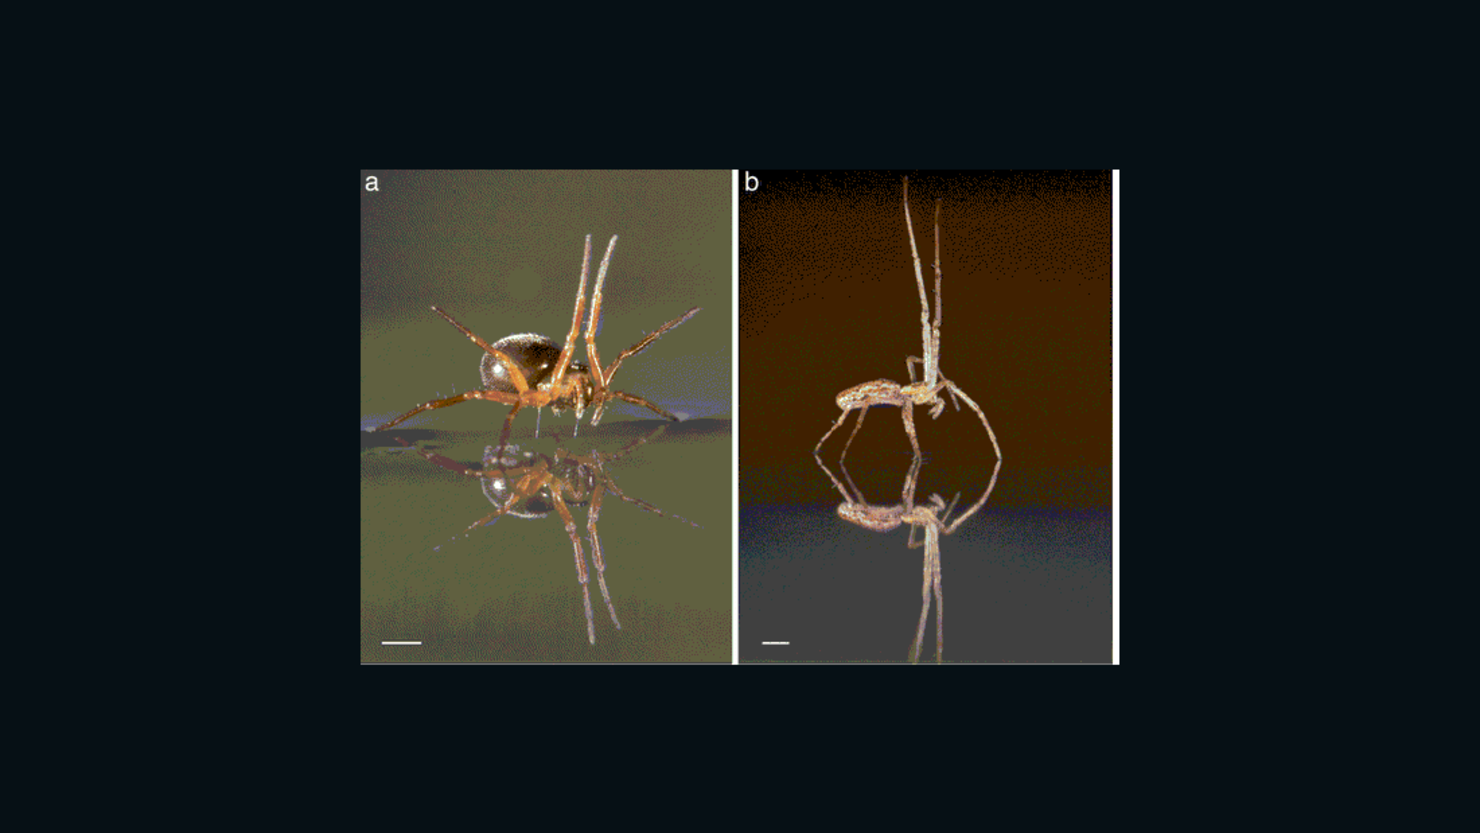 Many spiders can sail great distances over water, using legs or abdomens as sails